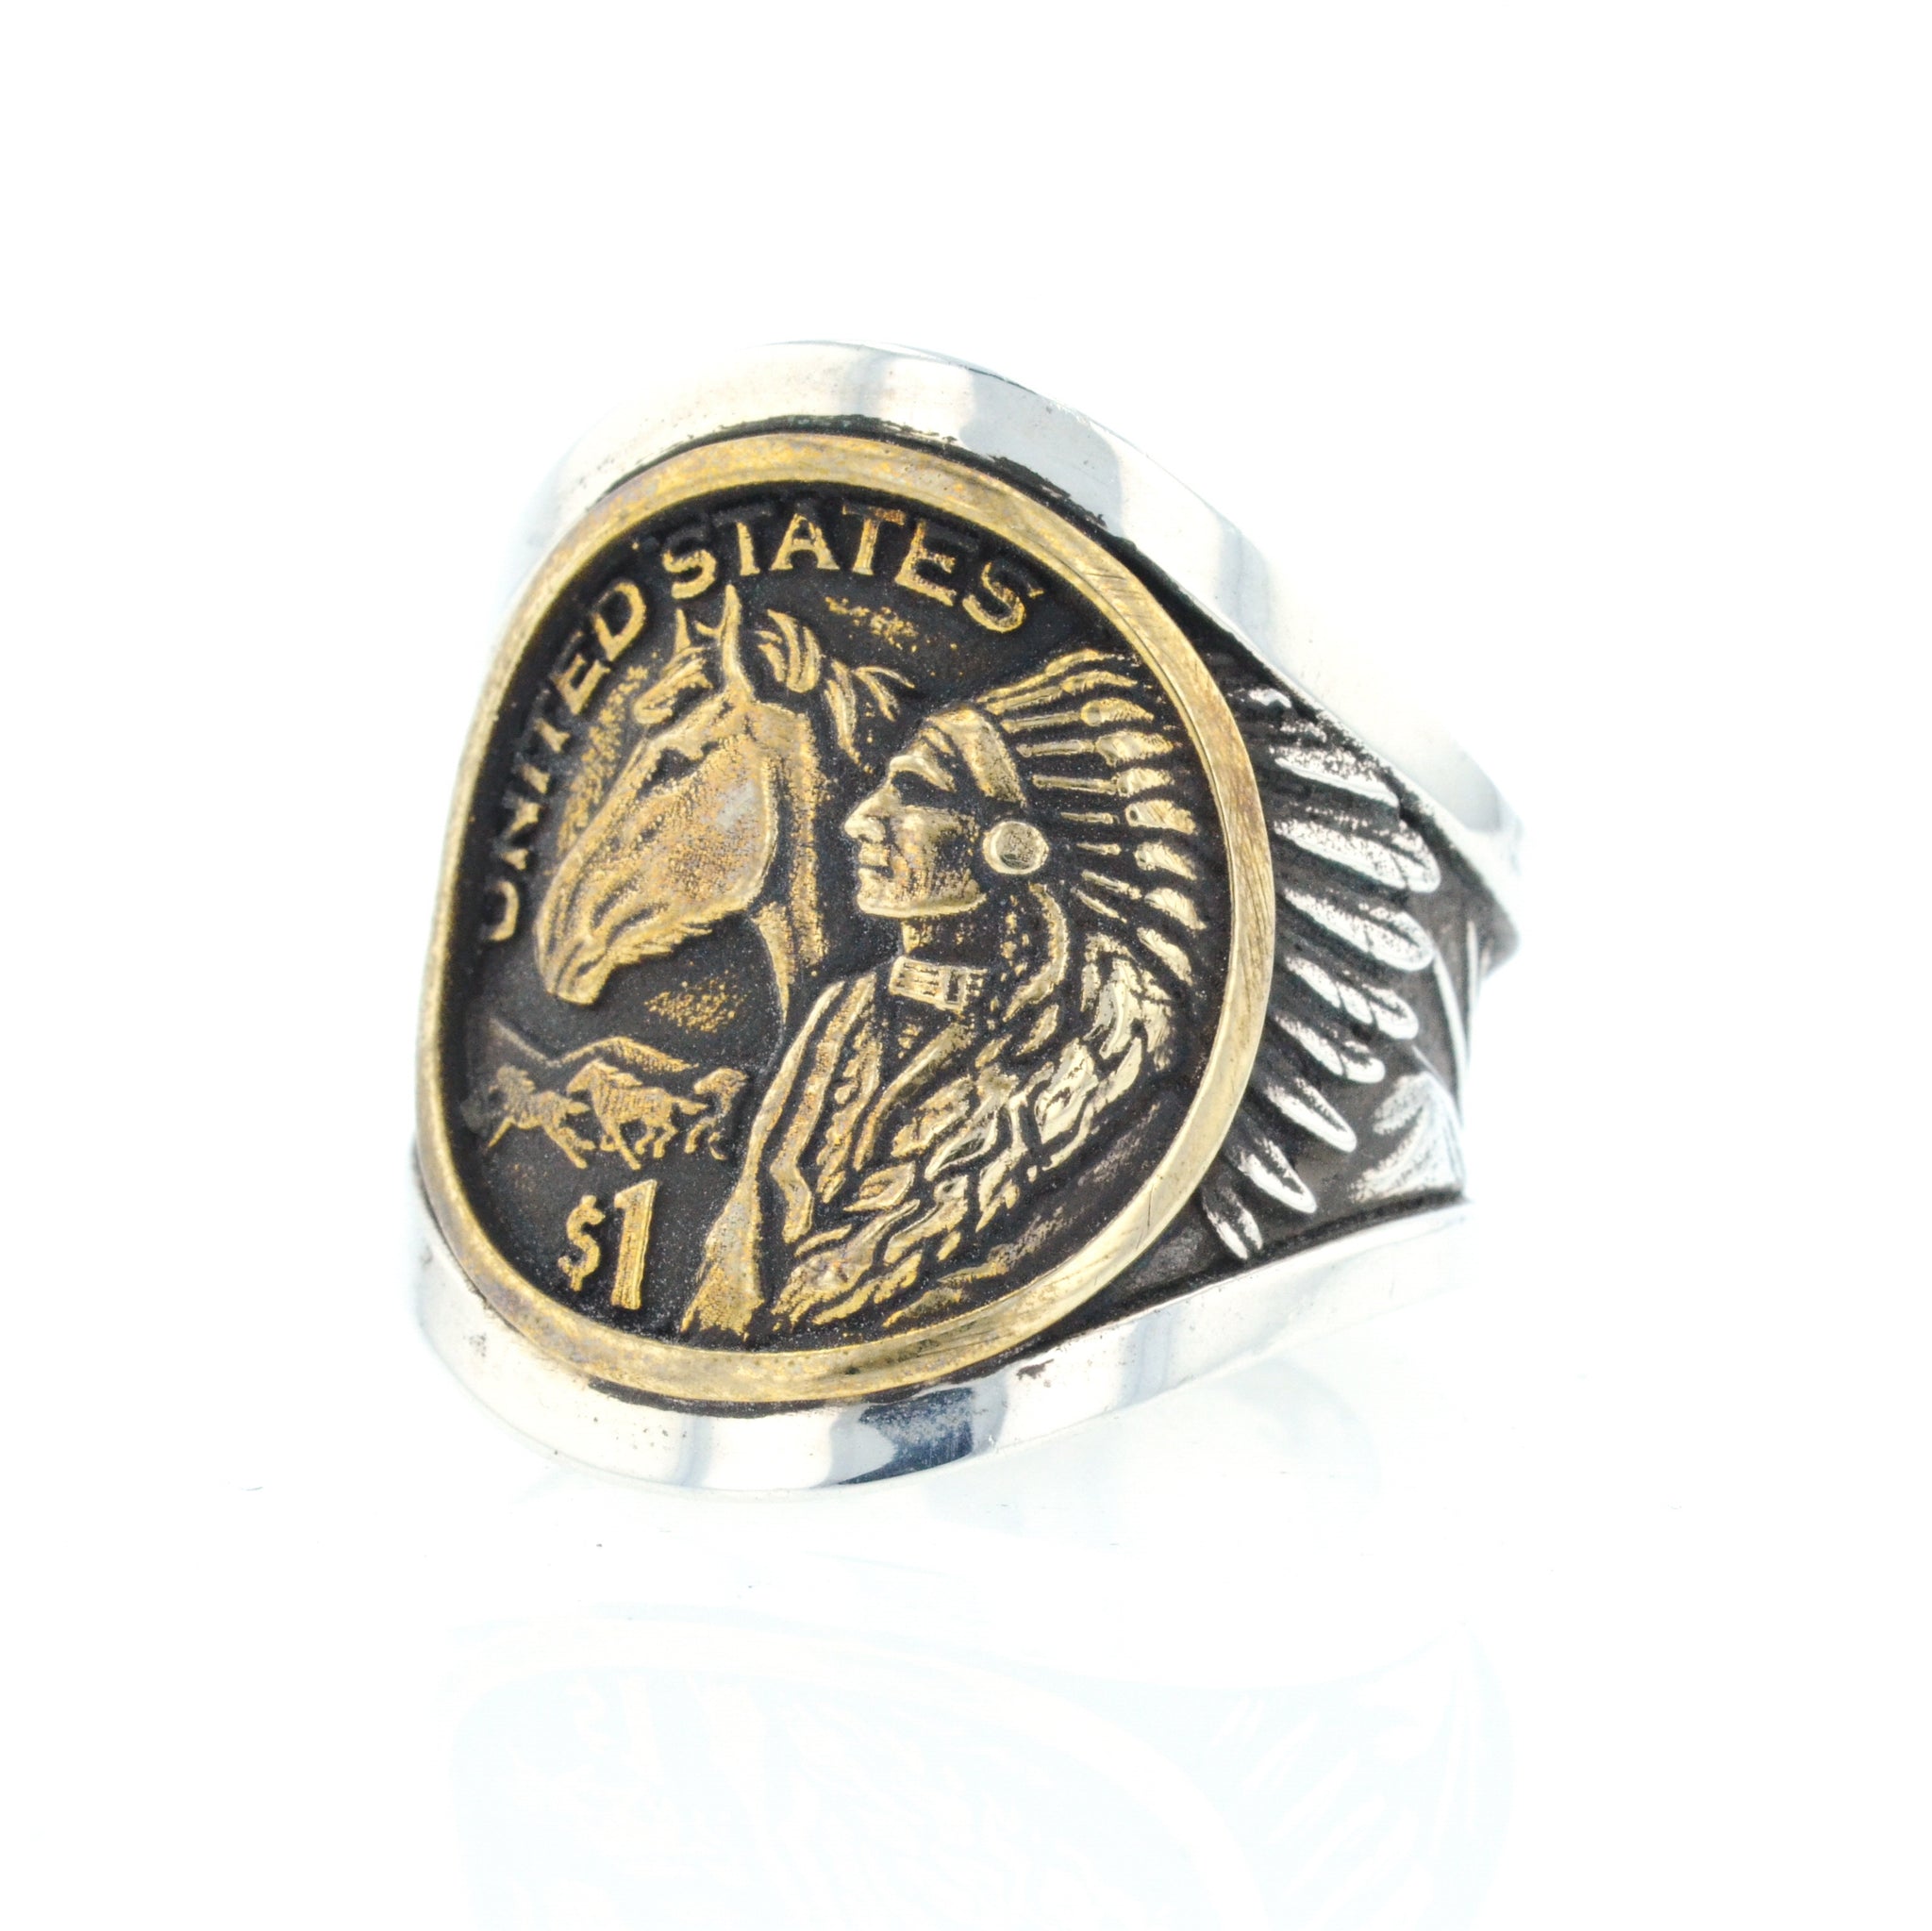 King Baby Chief and Horse Ring